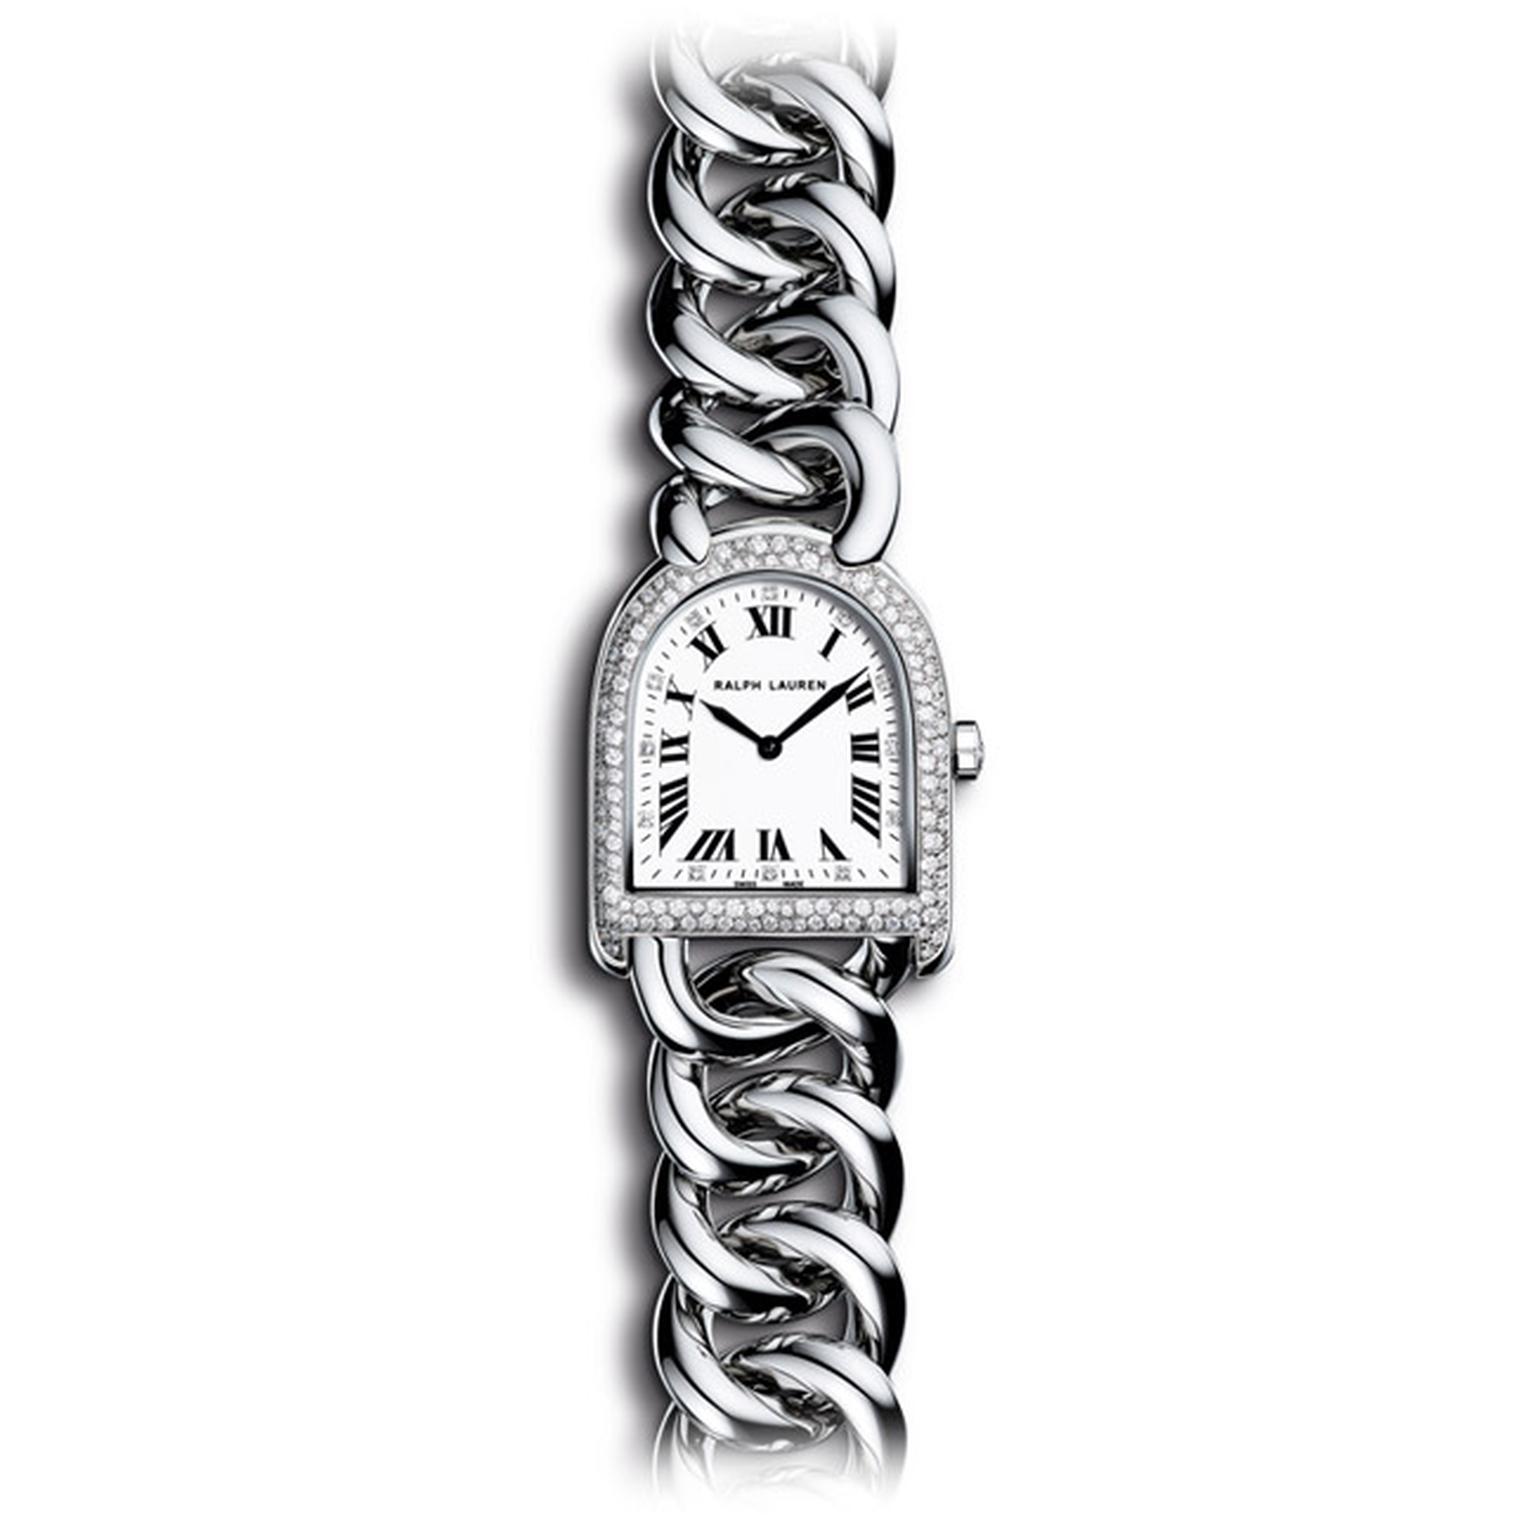 The new Ralph Lauren Petite Link Stirrup watch reflects the latest trend for smaller-sized women's watches. This model features a stainless steel case with a snow-set diamond bezel and accompanying link bracelet (£4,250).